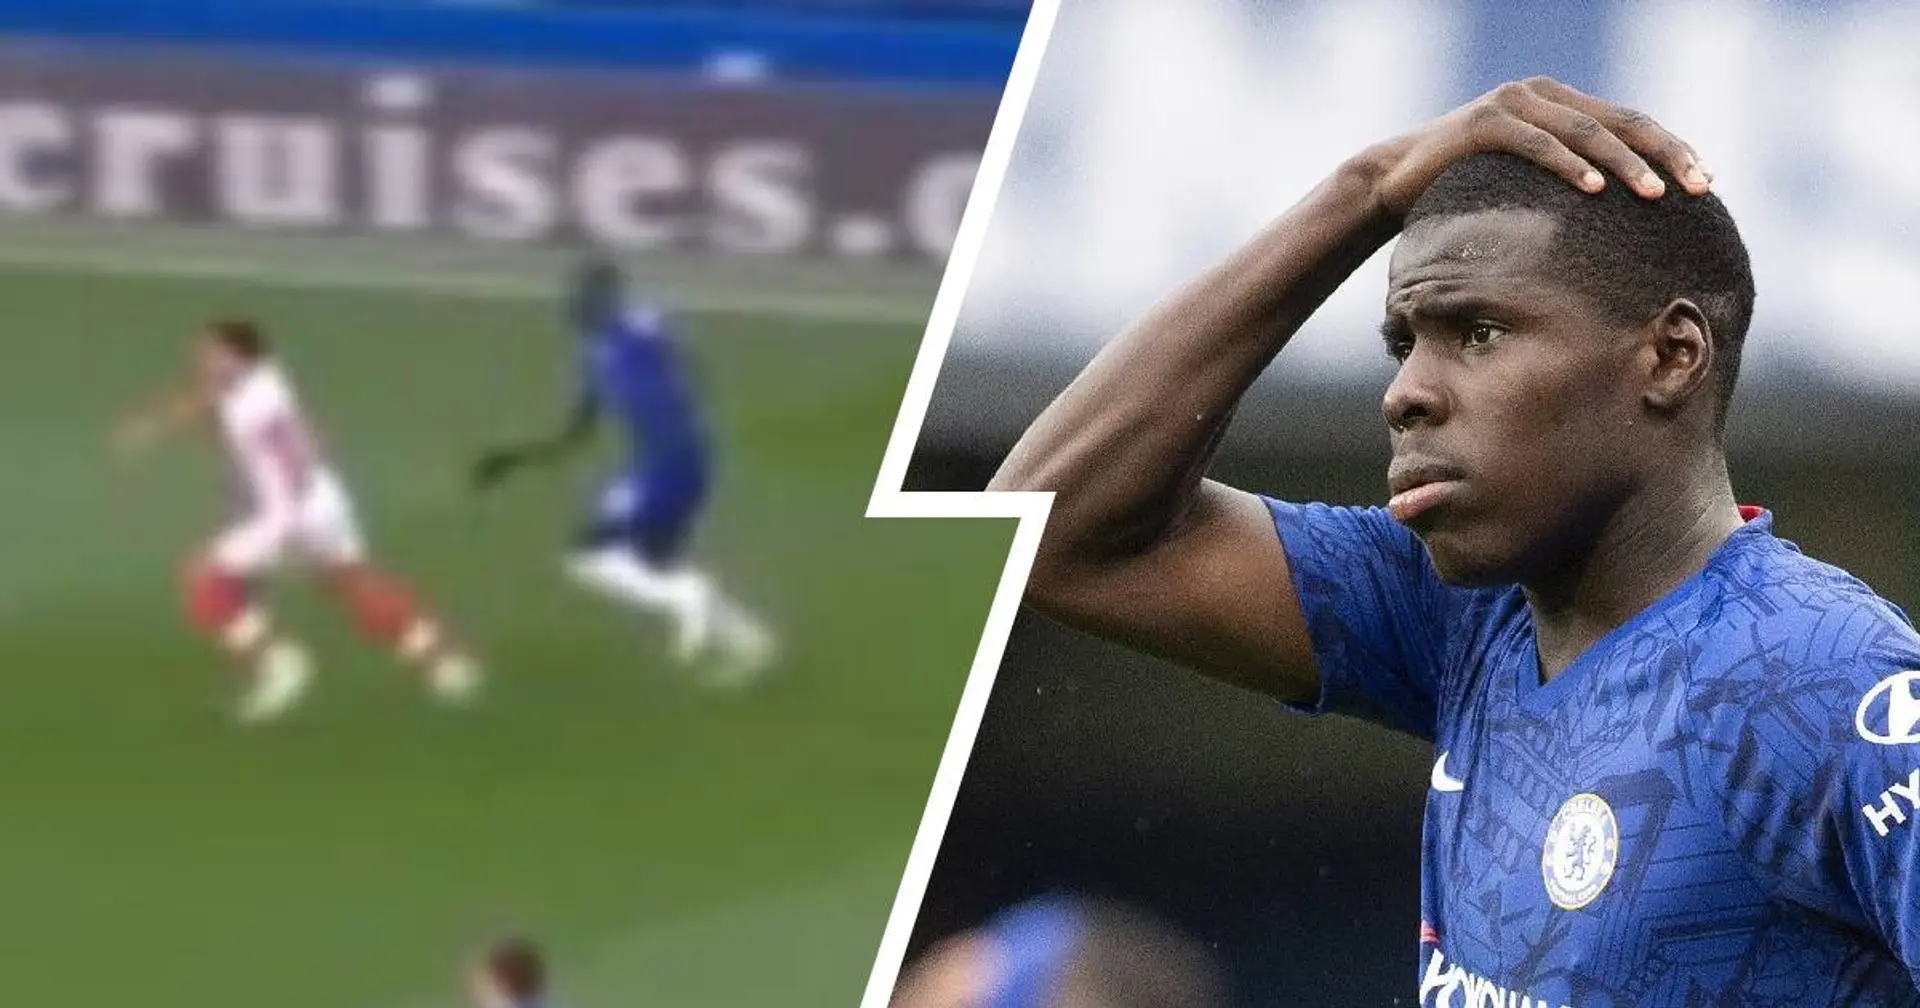 We can't win with defence like this - Take a look at Zouma's 'tracking back' for Southampton's goal